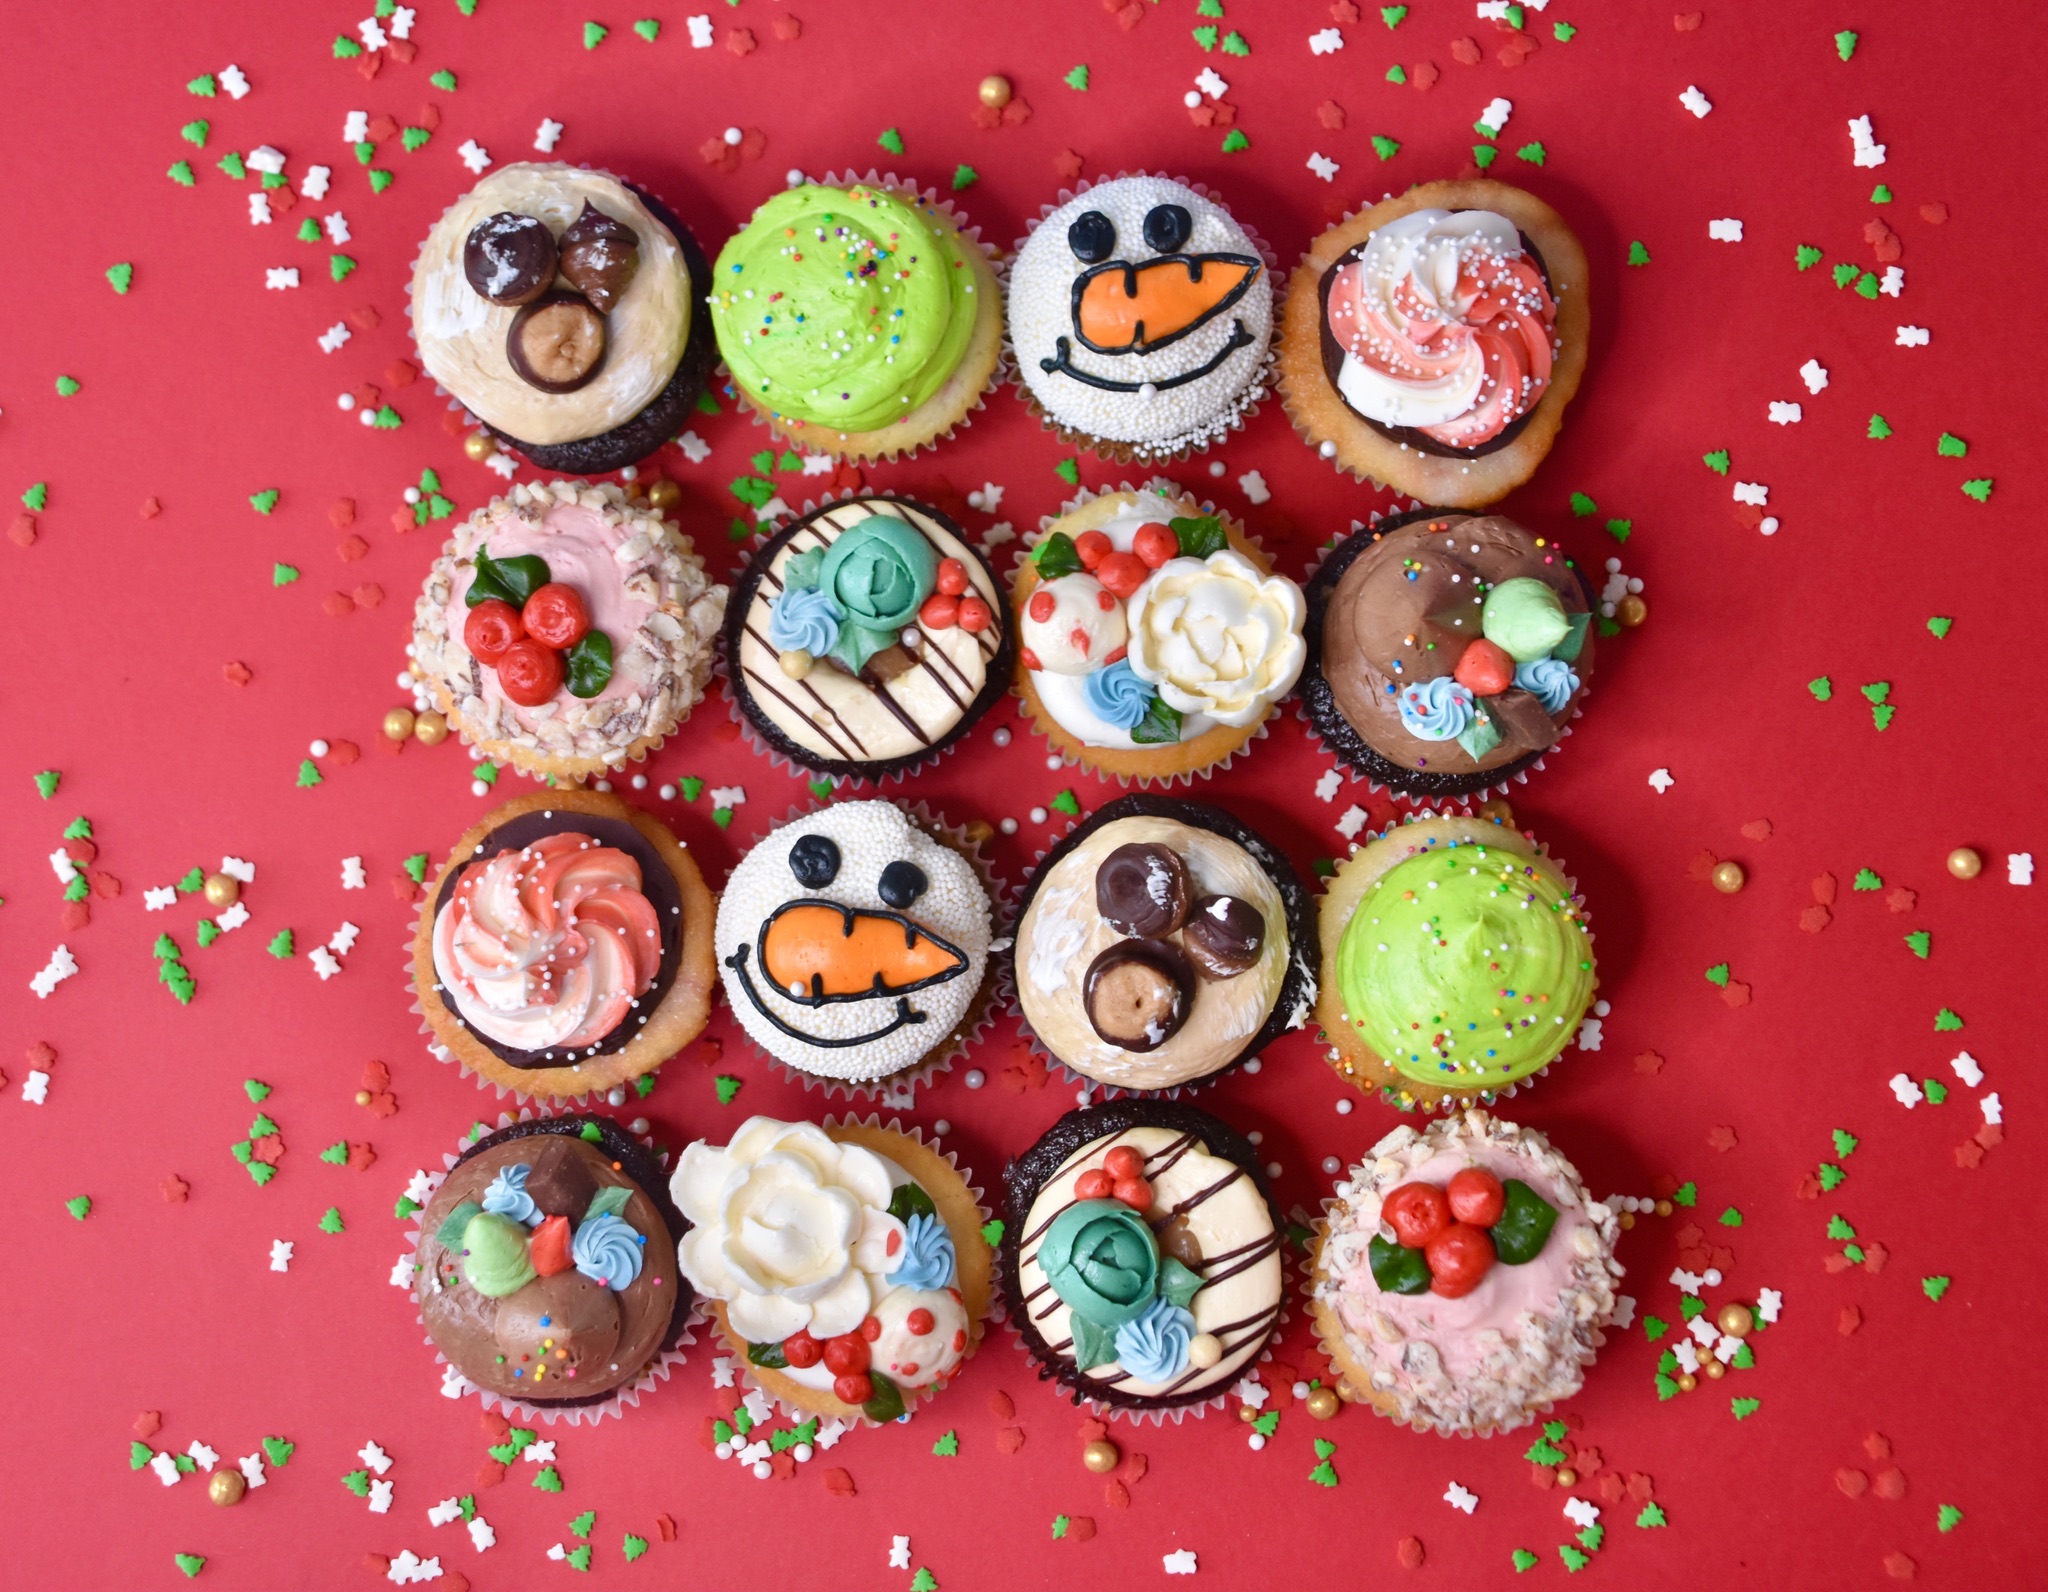 Christmas Decorated Cupcakes